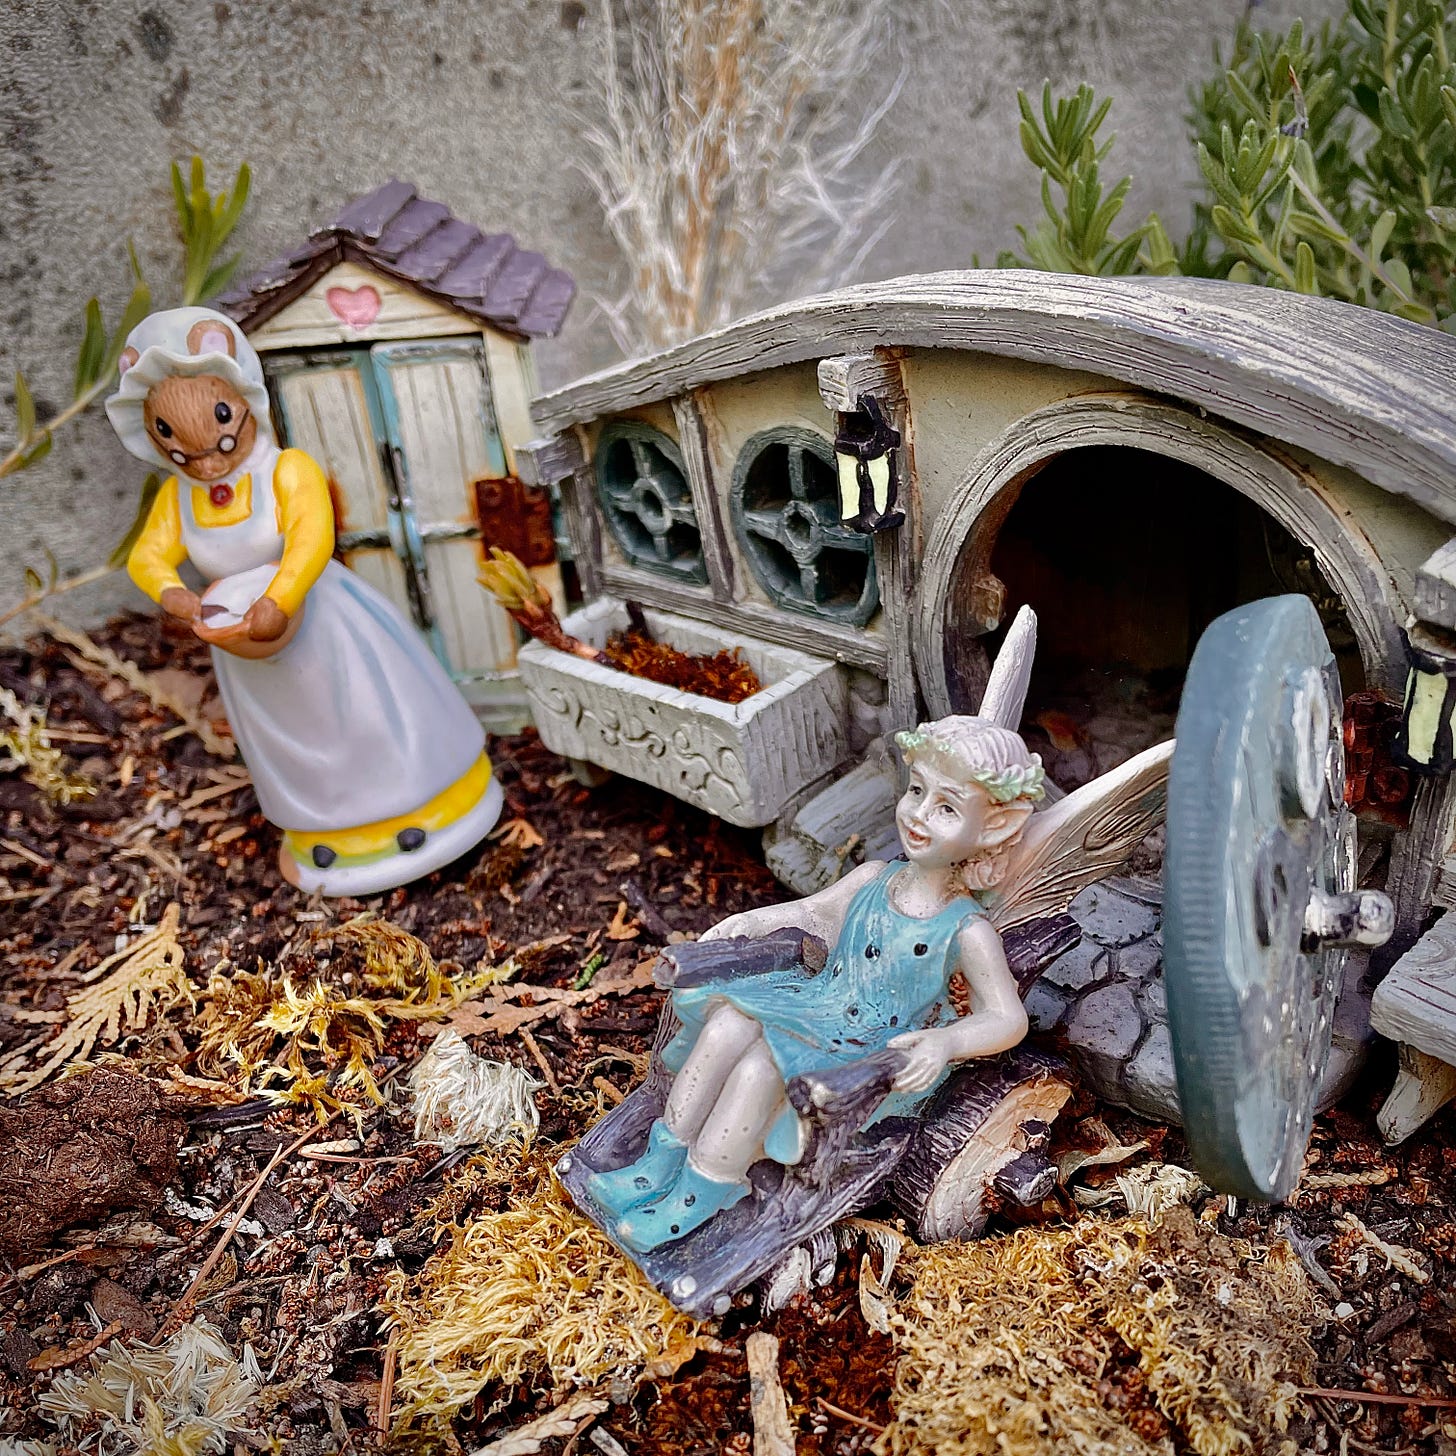 a faery garden with a mouse in dress and glasses, hobbit house, and a faery in a wheel chair with wood wheels.